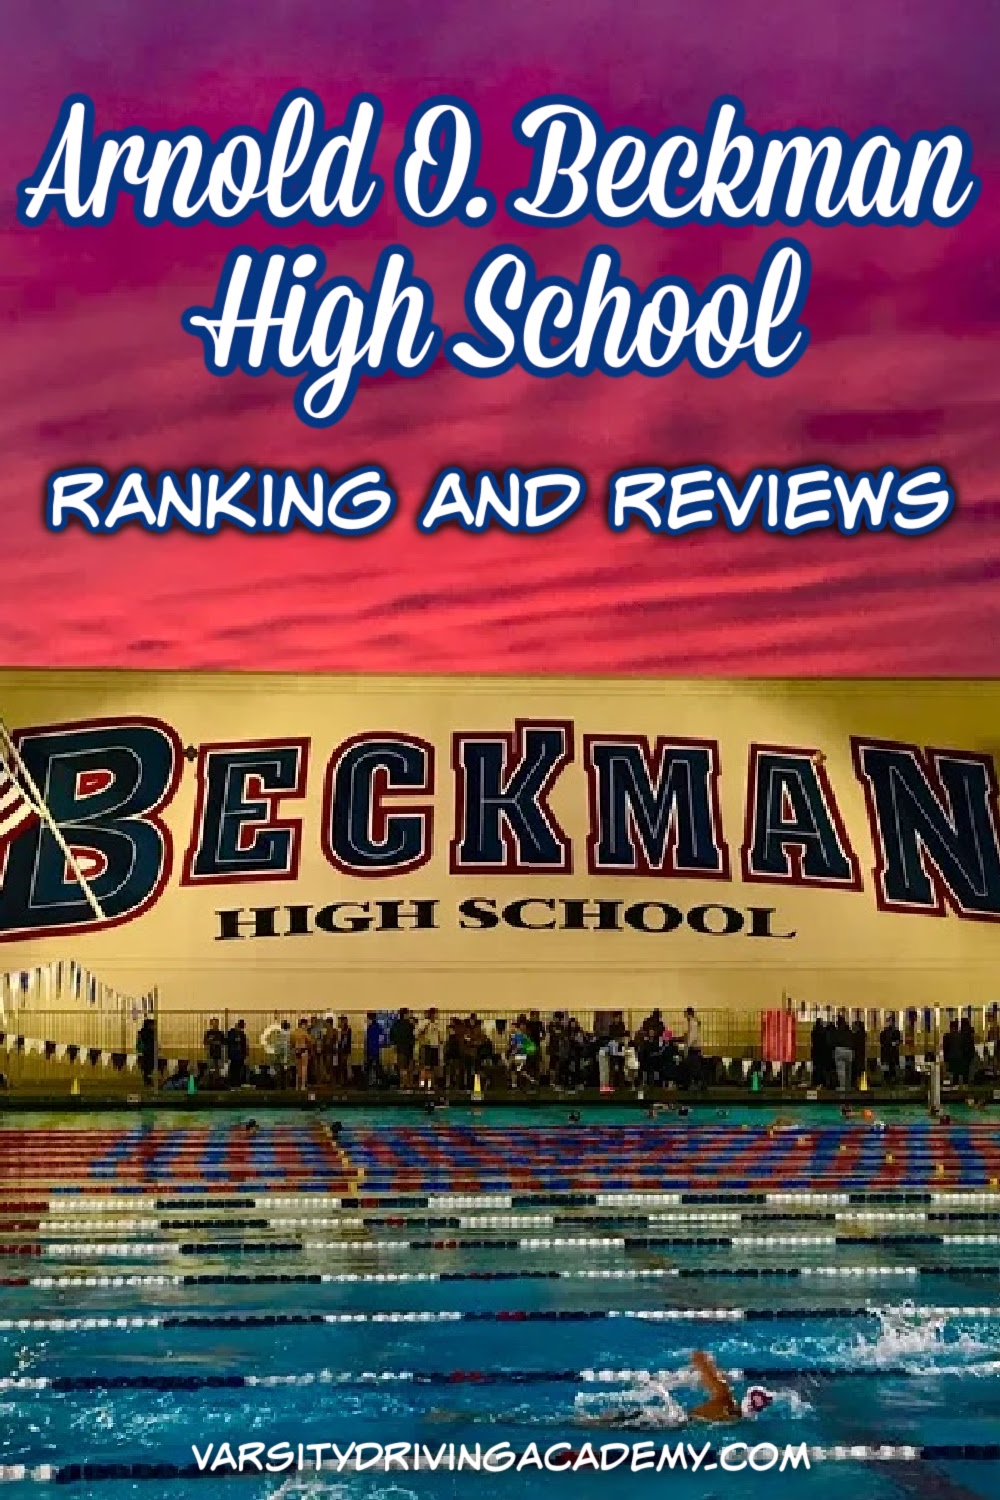 Great Schools takes a look at what makes Arnold O Beckman High School highly ranked in California and what it takes to make a great school.